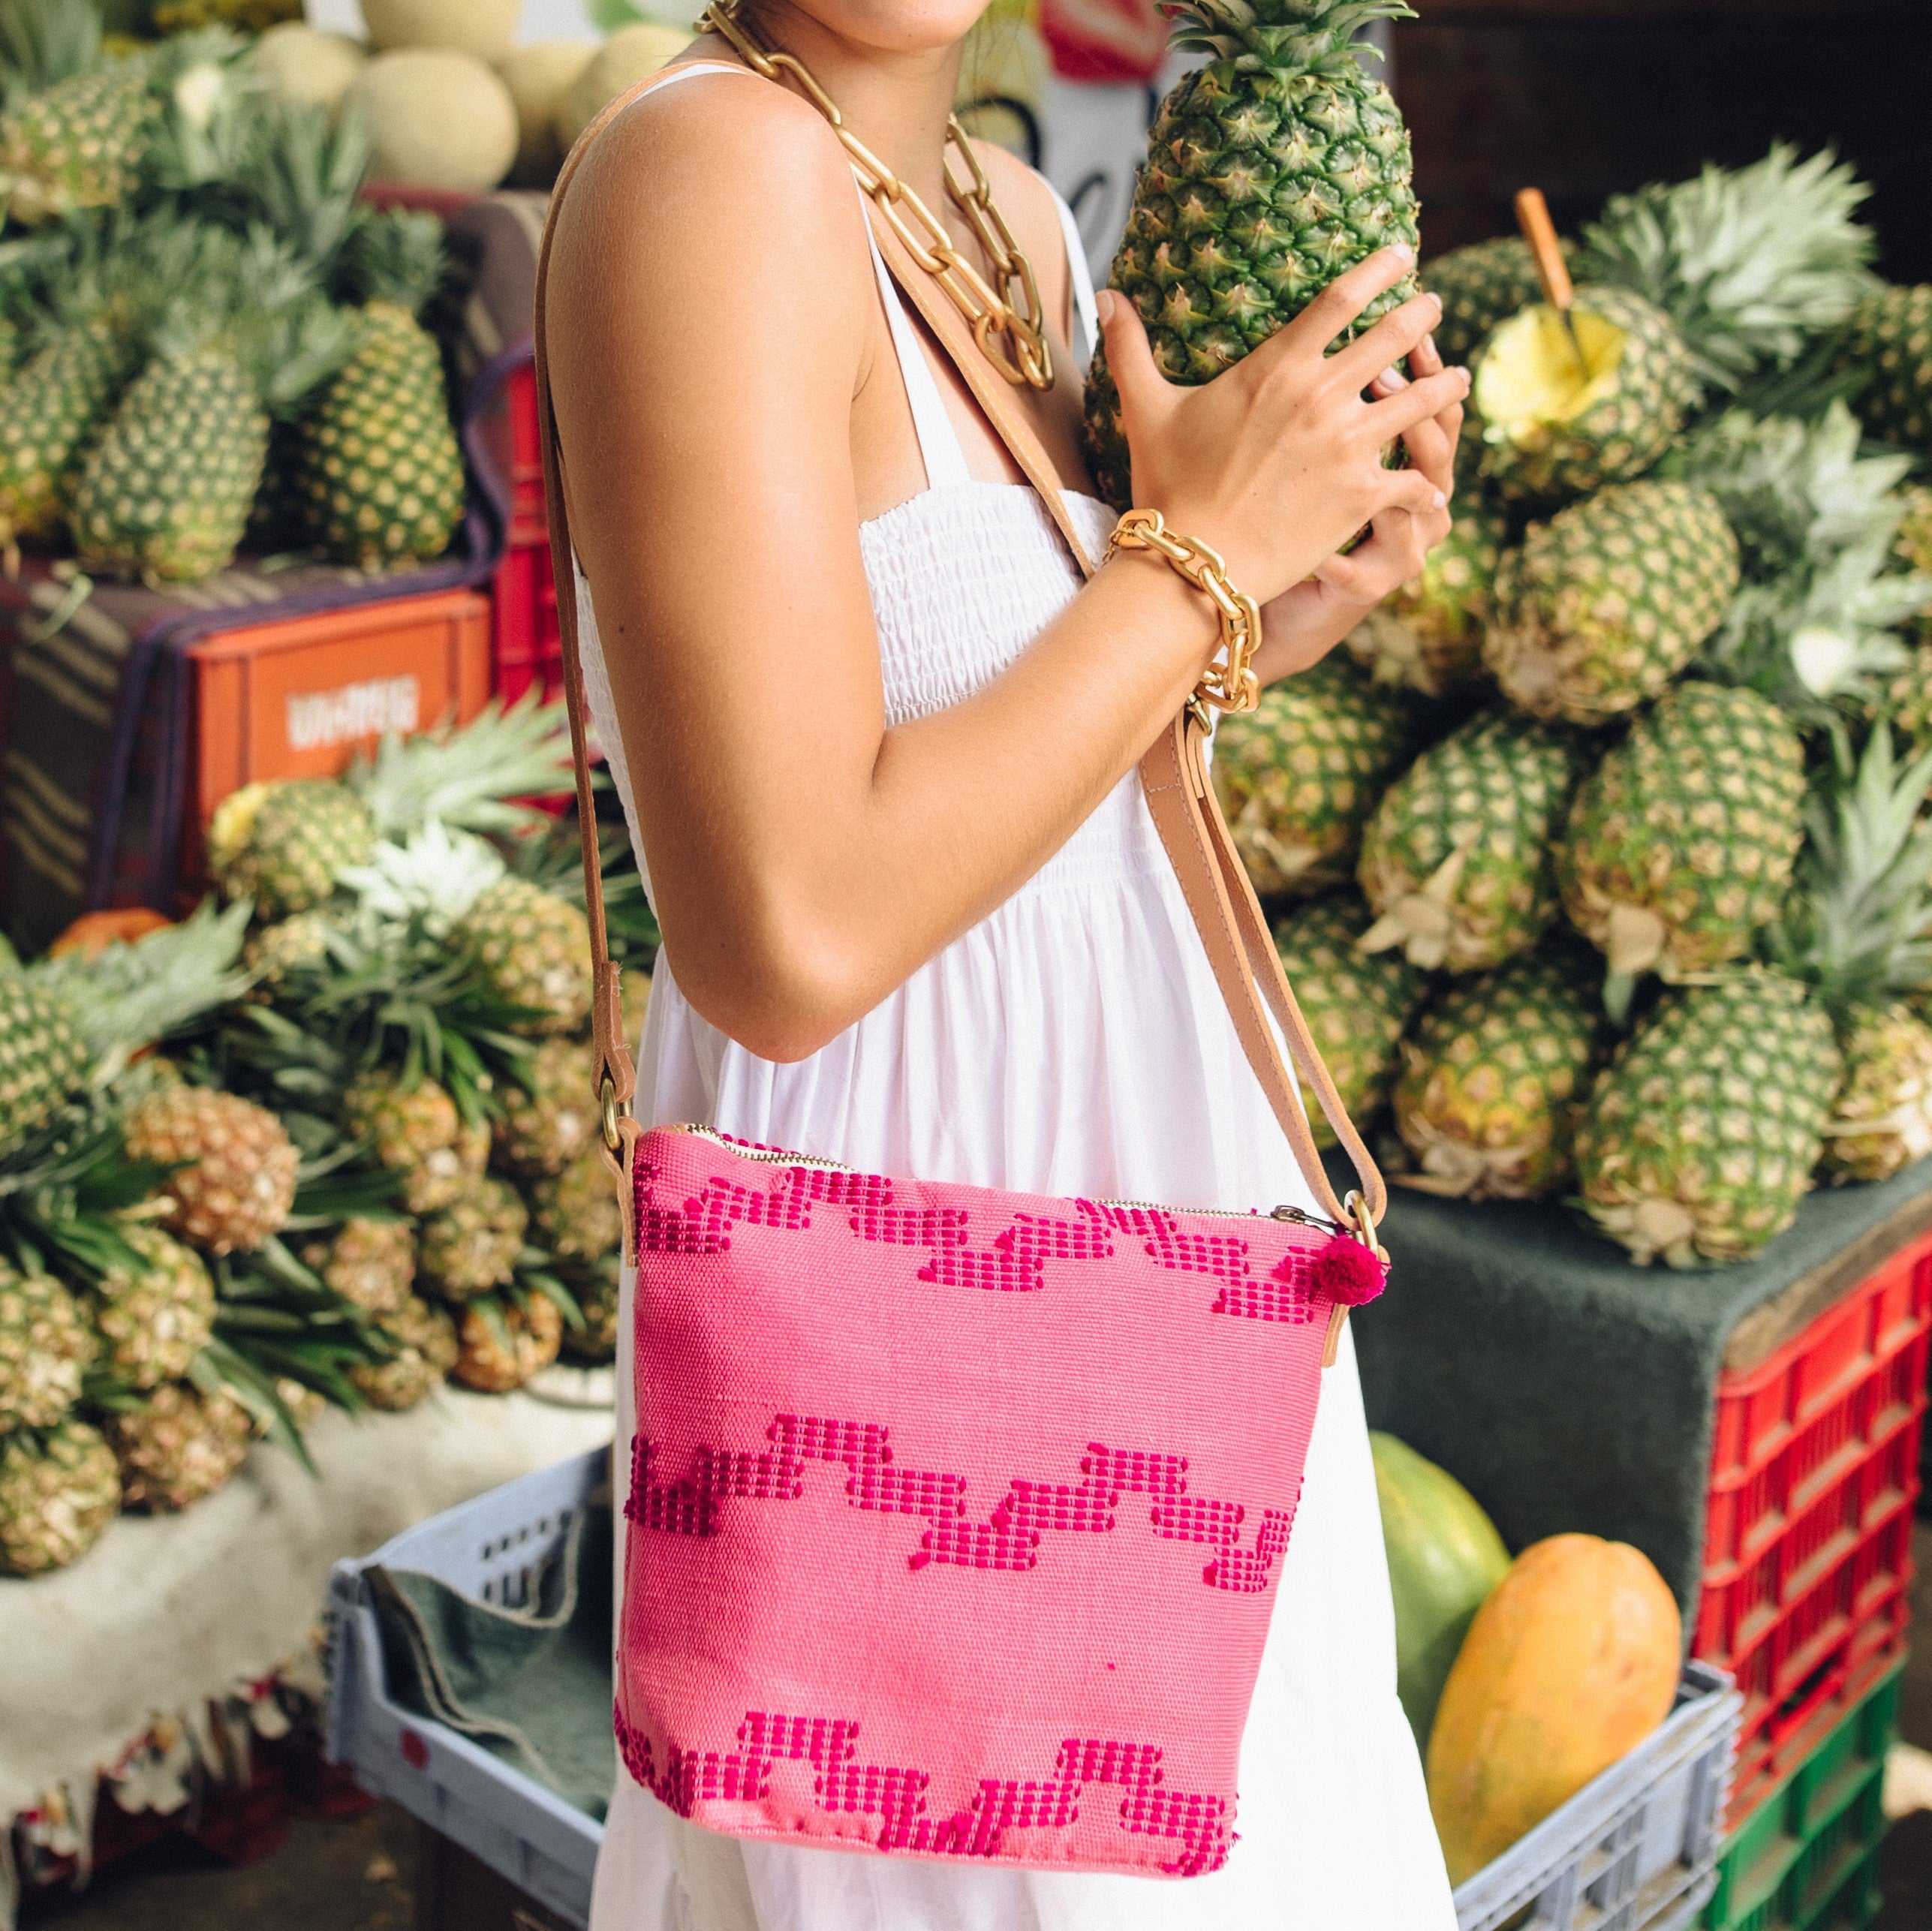 A model wears the hand woven artisan Mini Lidia Crossbody in Pitaya style. The model poses in front of a fruit vendor.